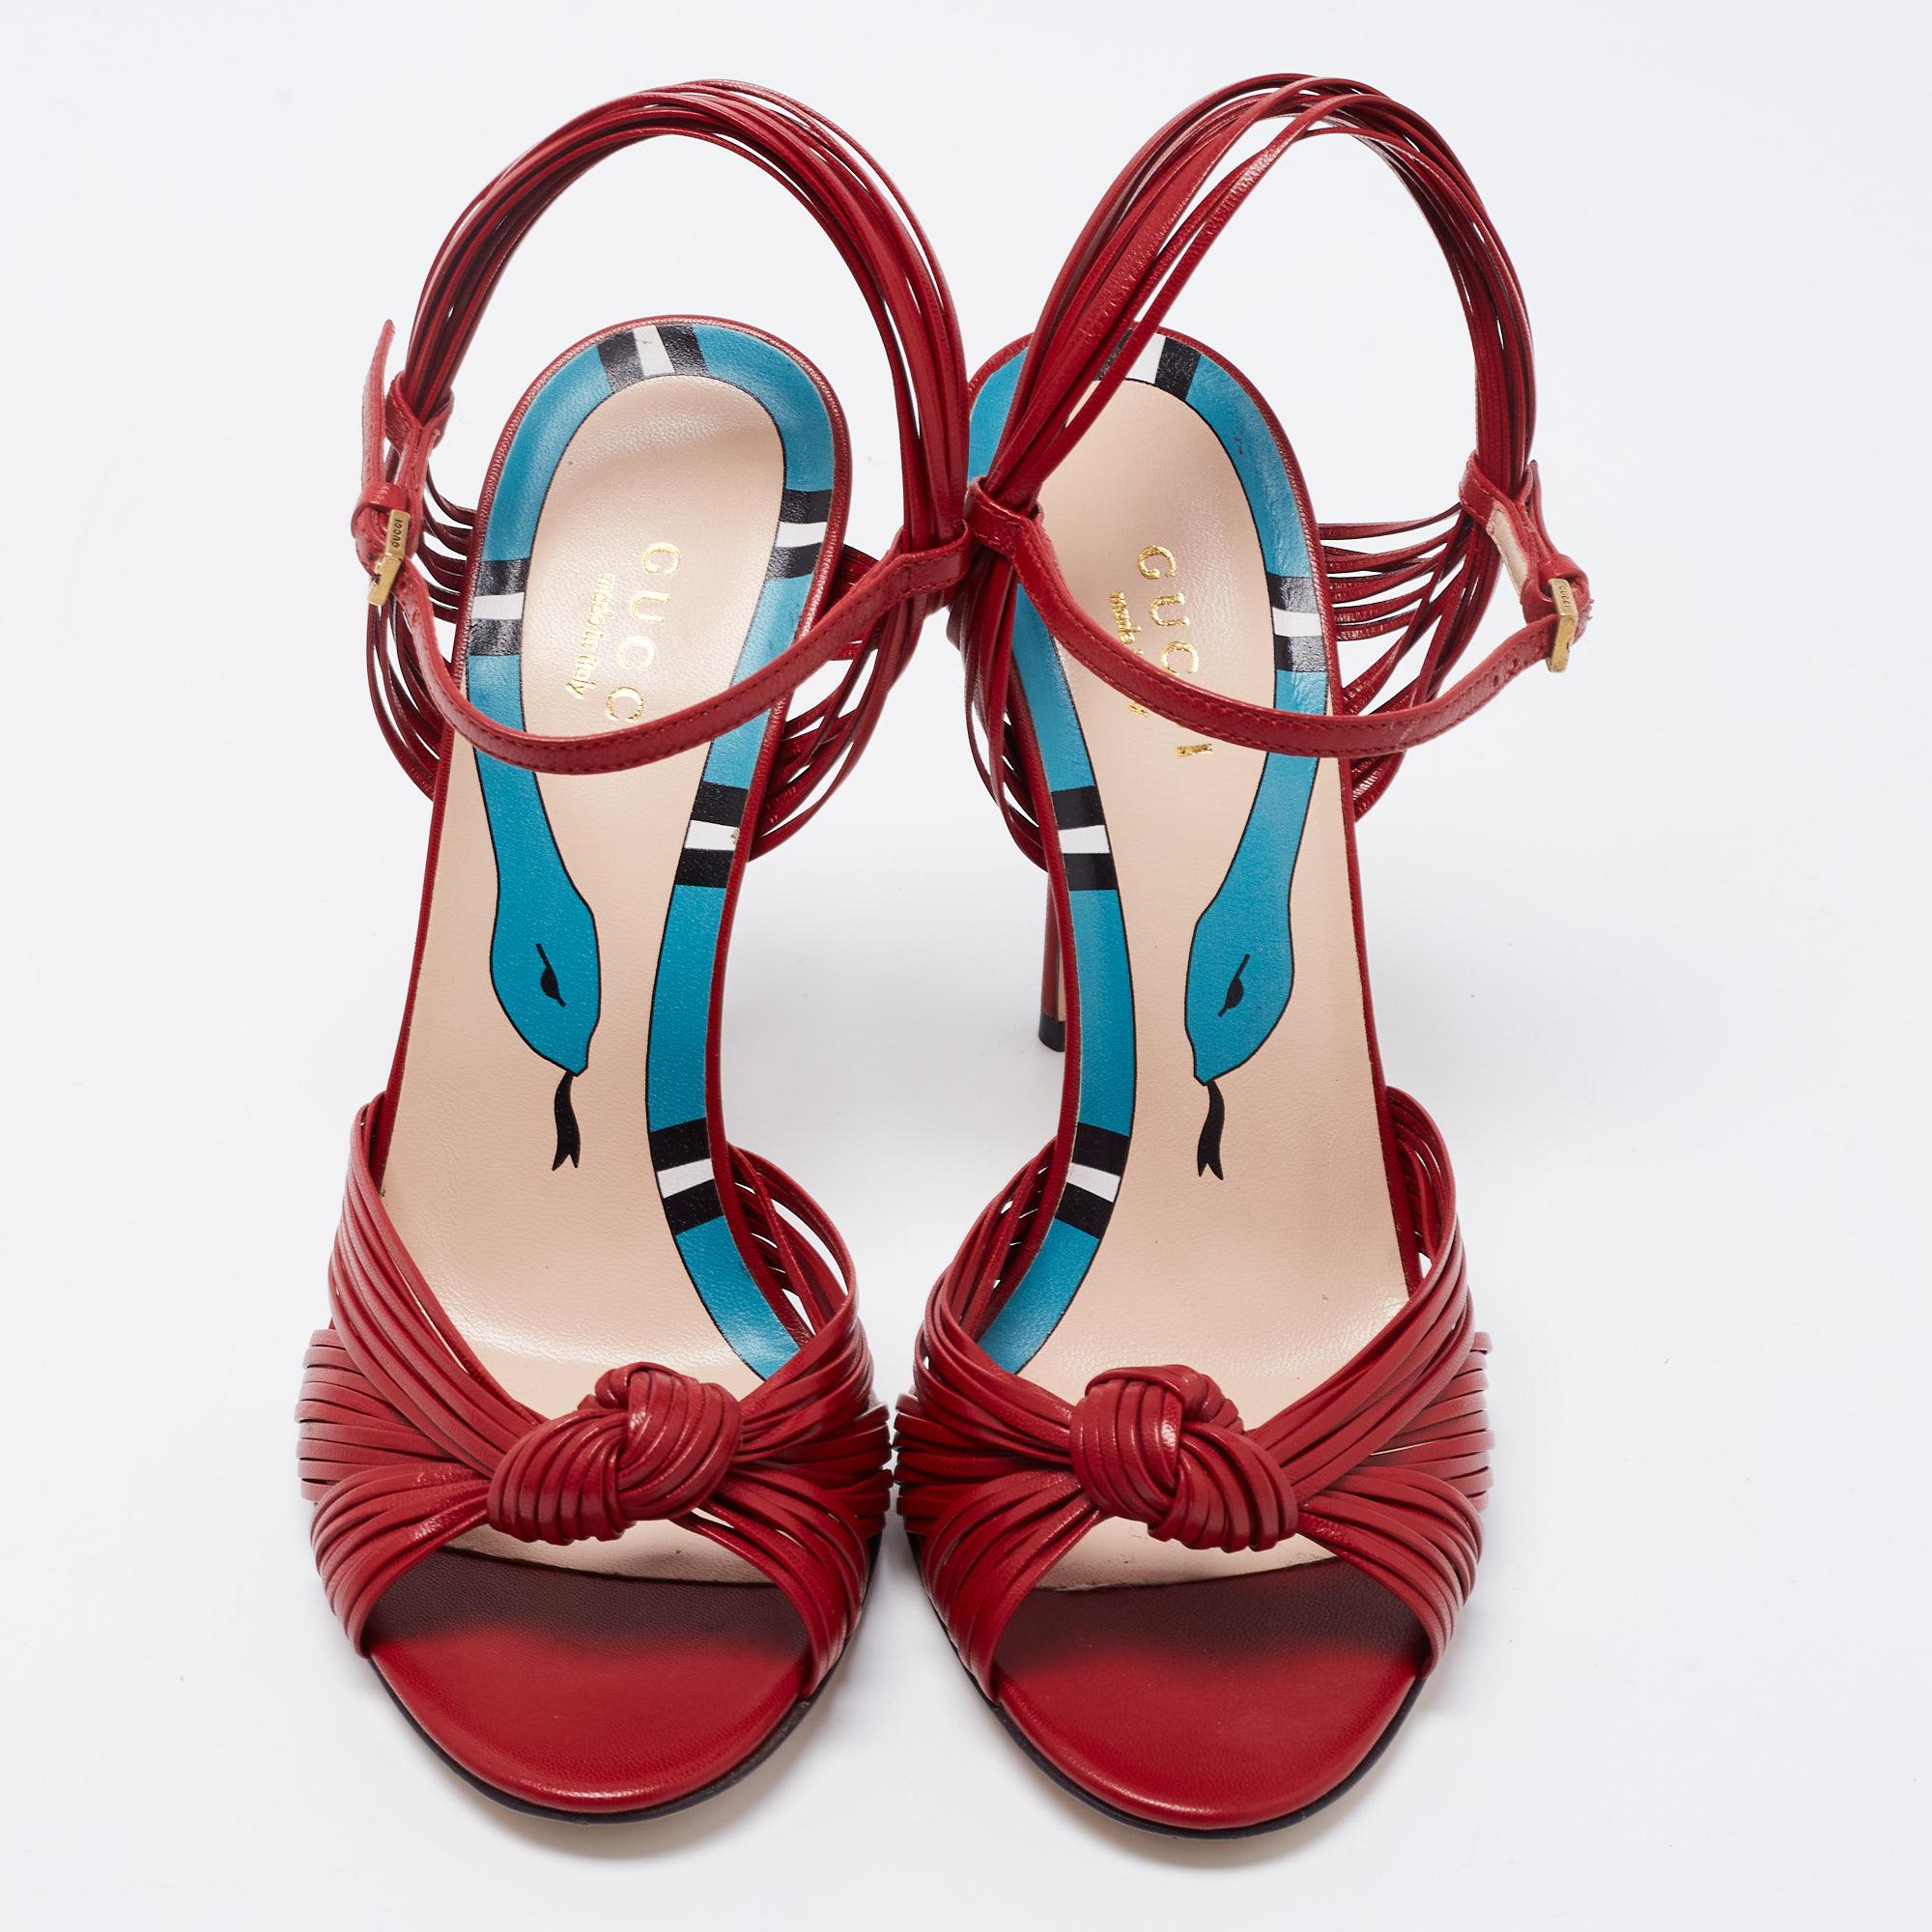 The knotted detailing on the toes serves as a striking element of these Gucci sandals. Created from leather, they are equipped with an ankle buckle closure, grey-tone hardware, and 11cm heels.

